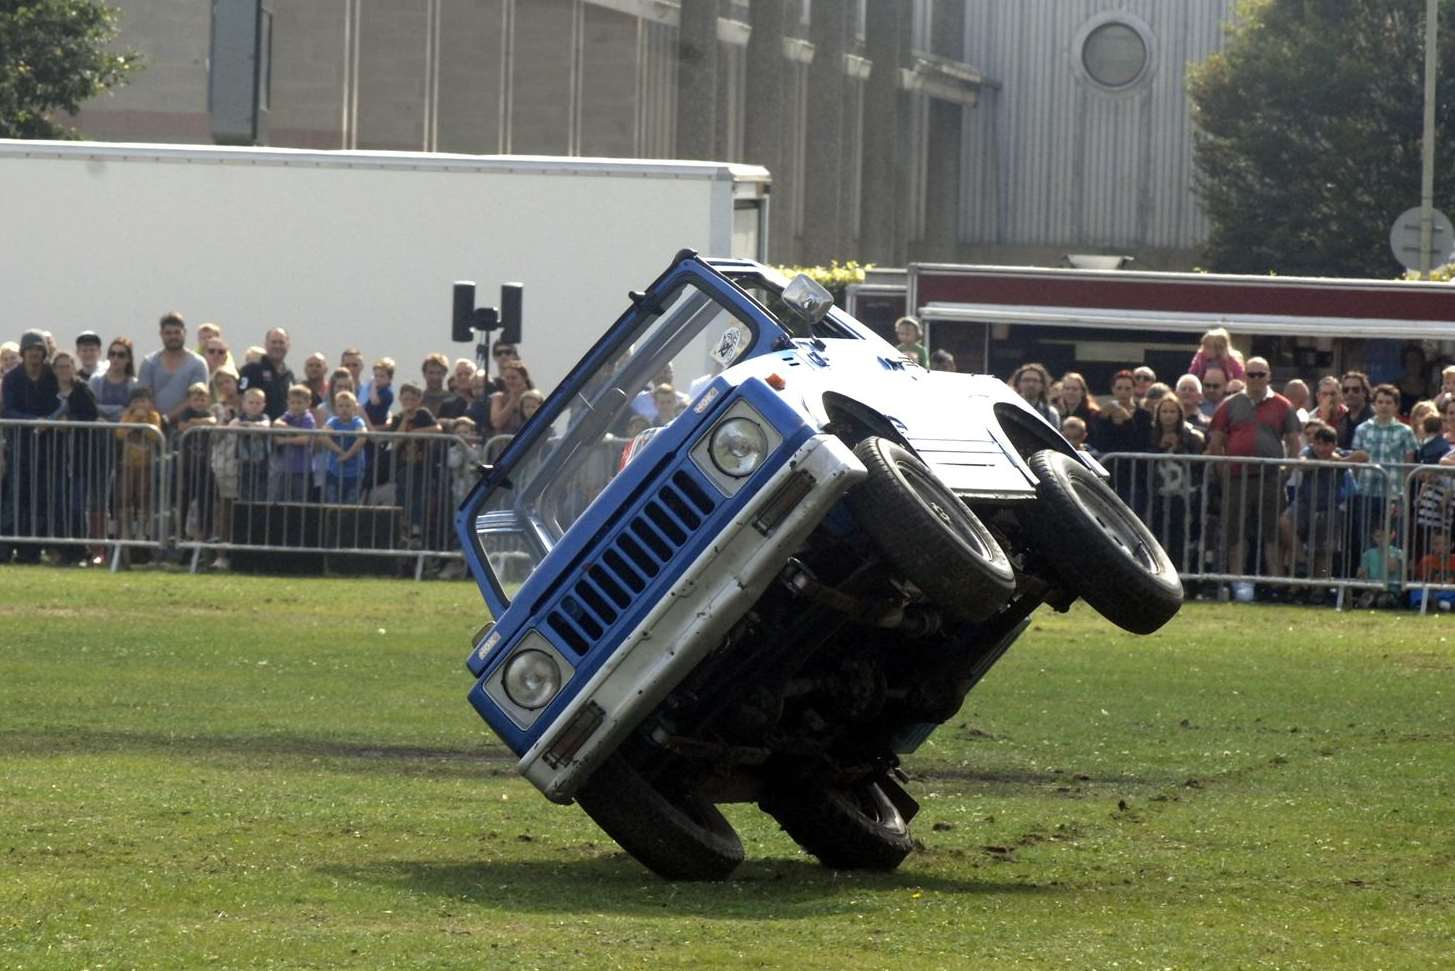 The extreme stunt show caused controversy last year